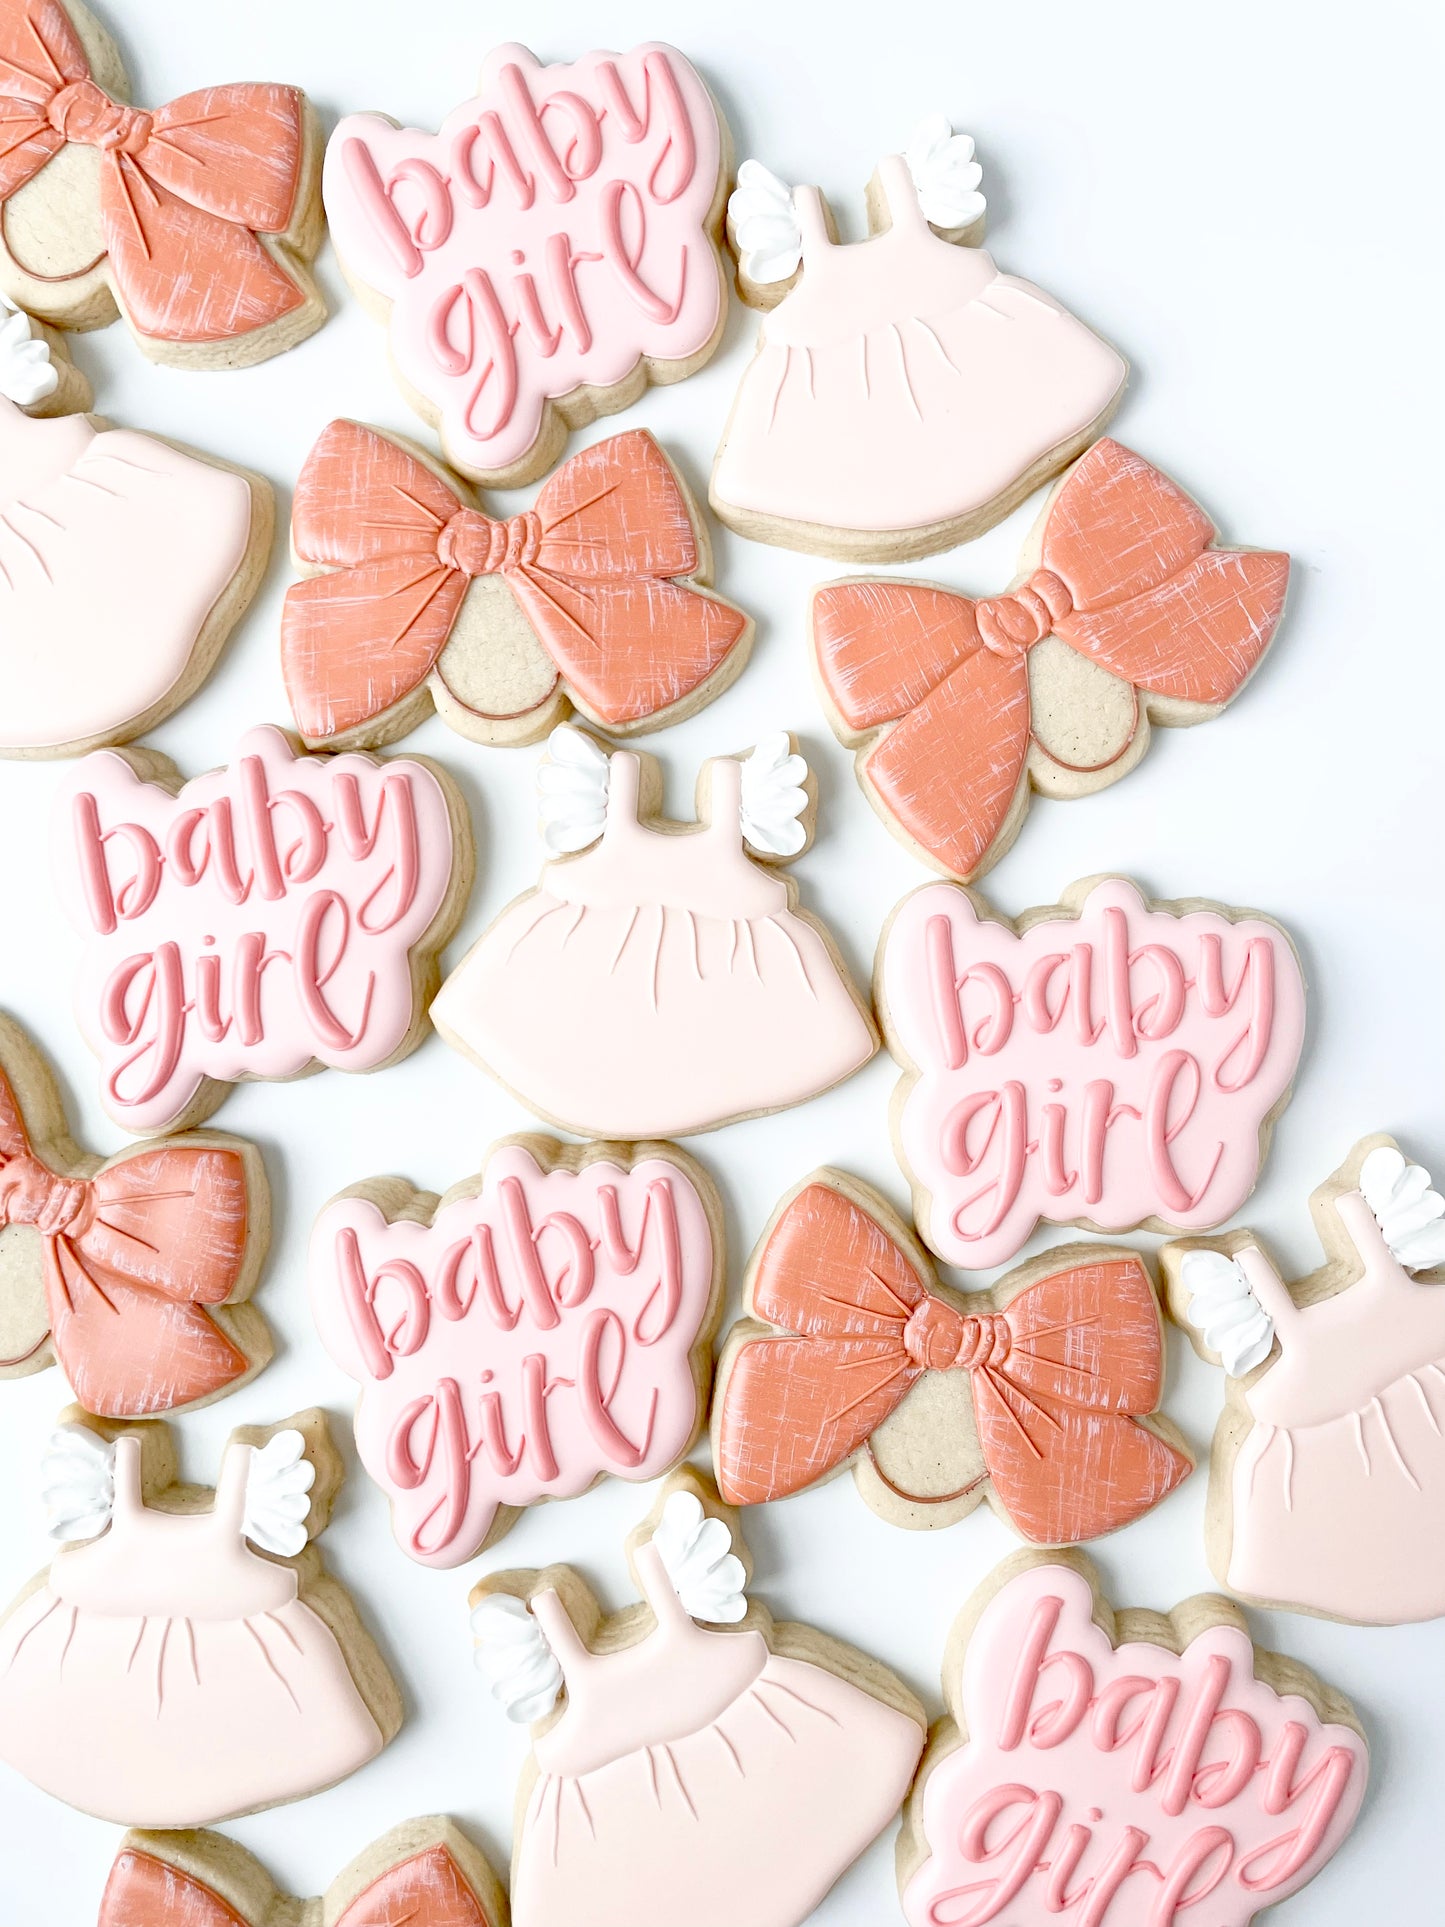 Baby Girl or Baby Boy Plaque Cookie Cutter